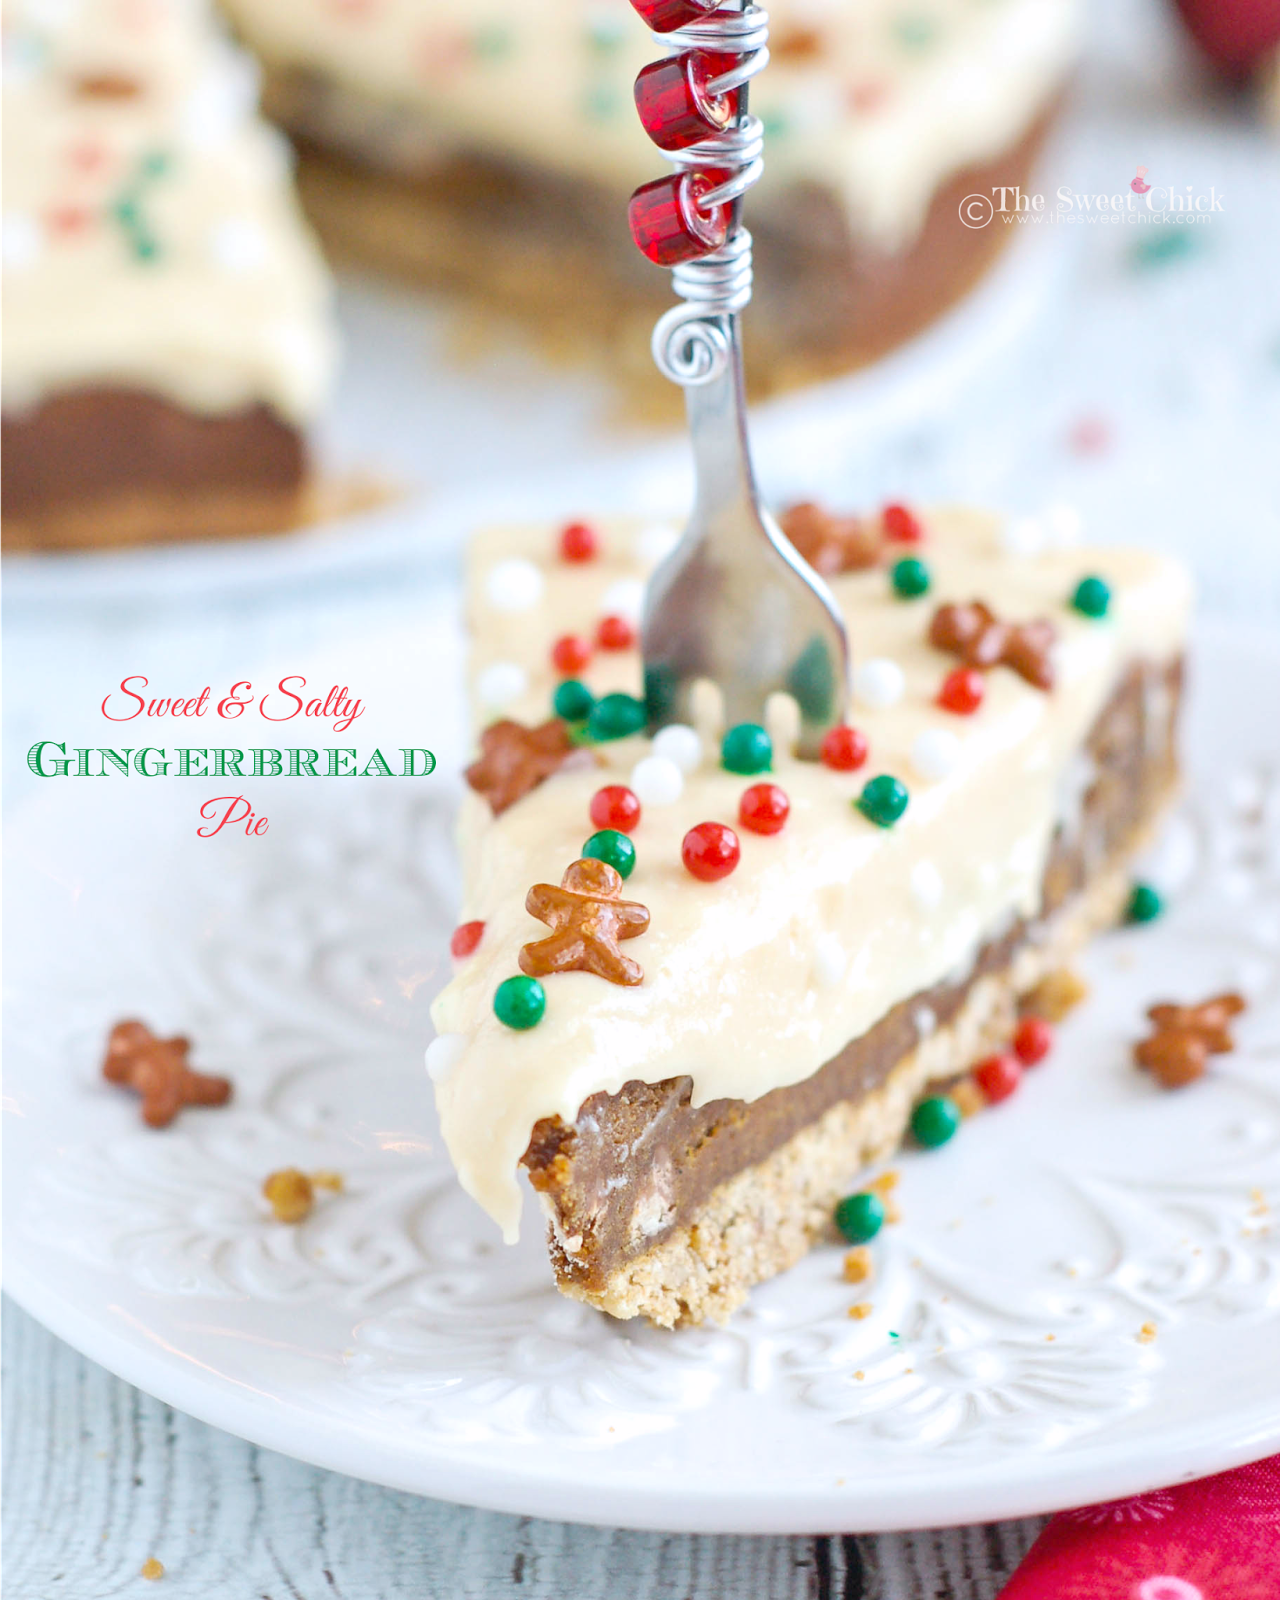 Sweet and Salty Gingerbread Pie by The Sweet Chick